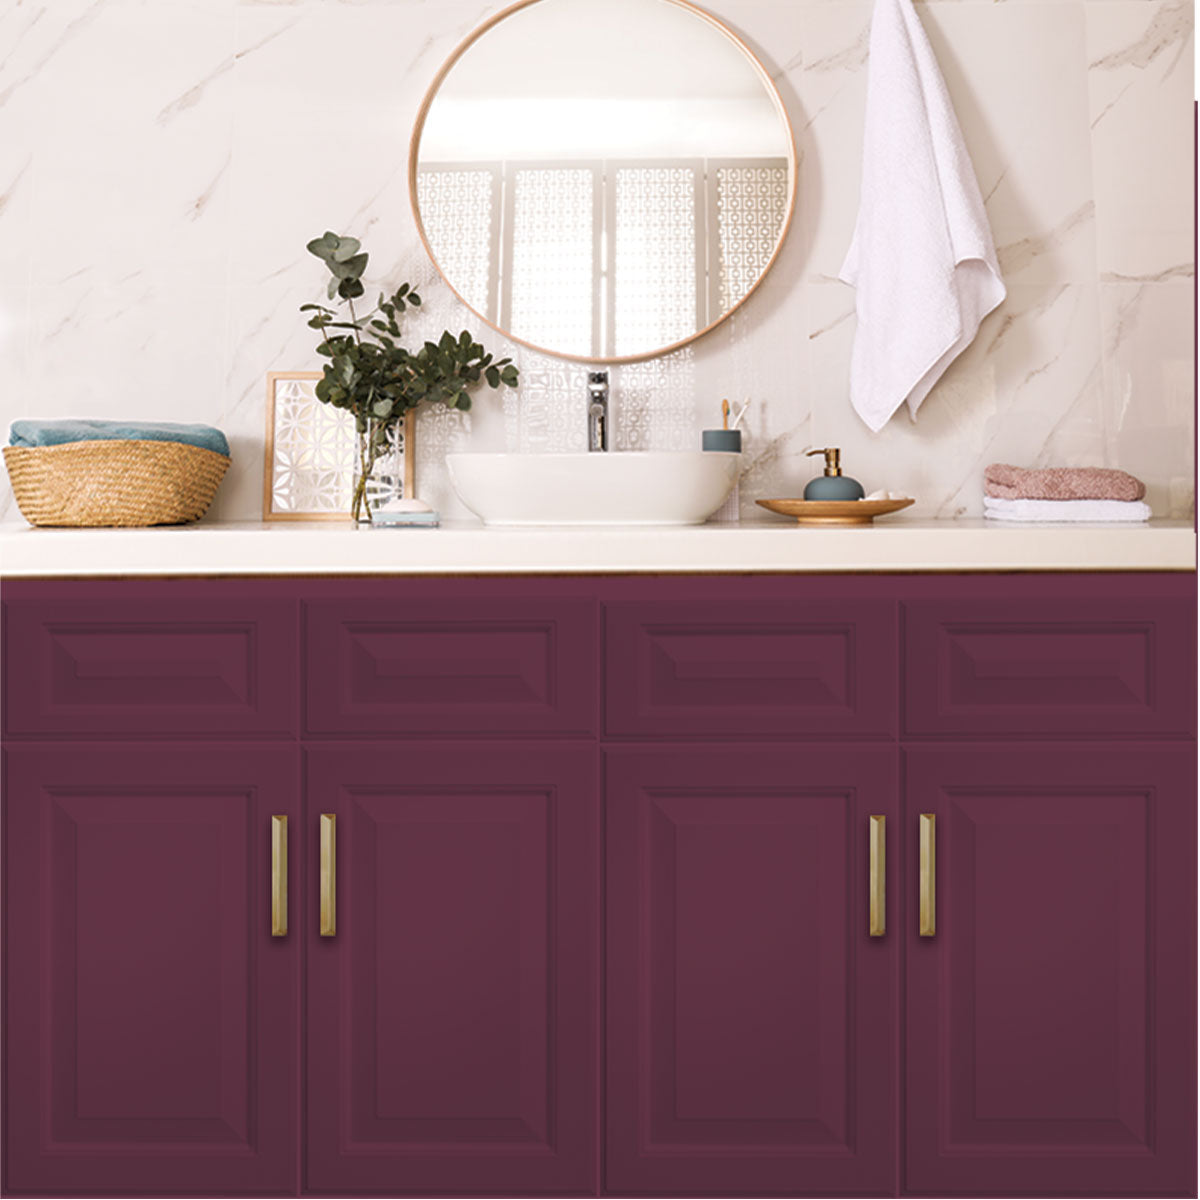 Ultratique (All-In-One) Plum